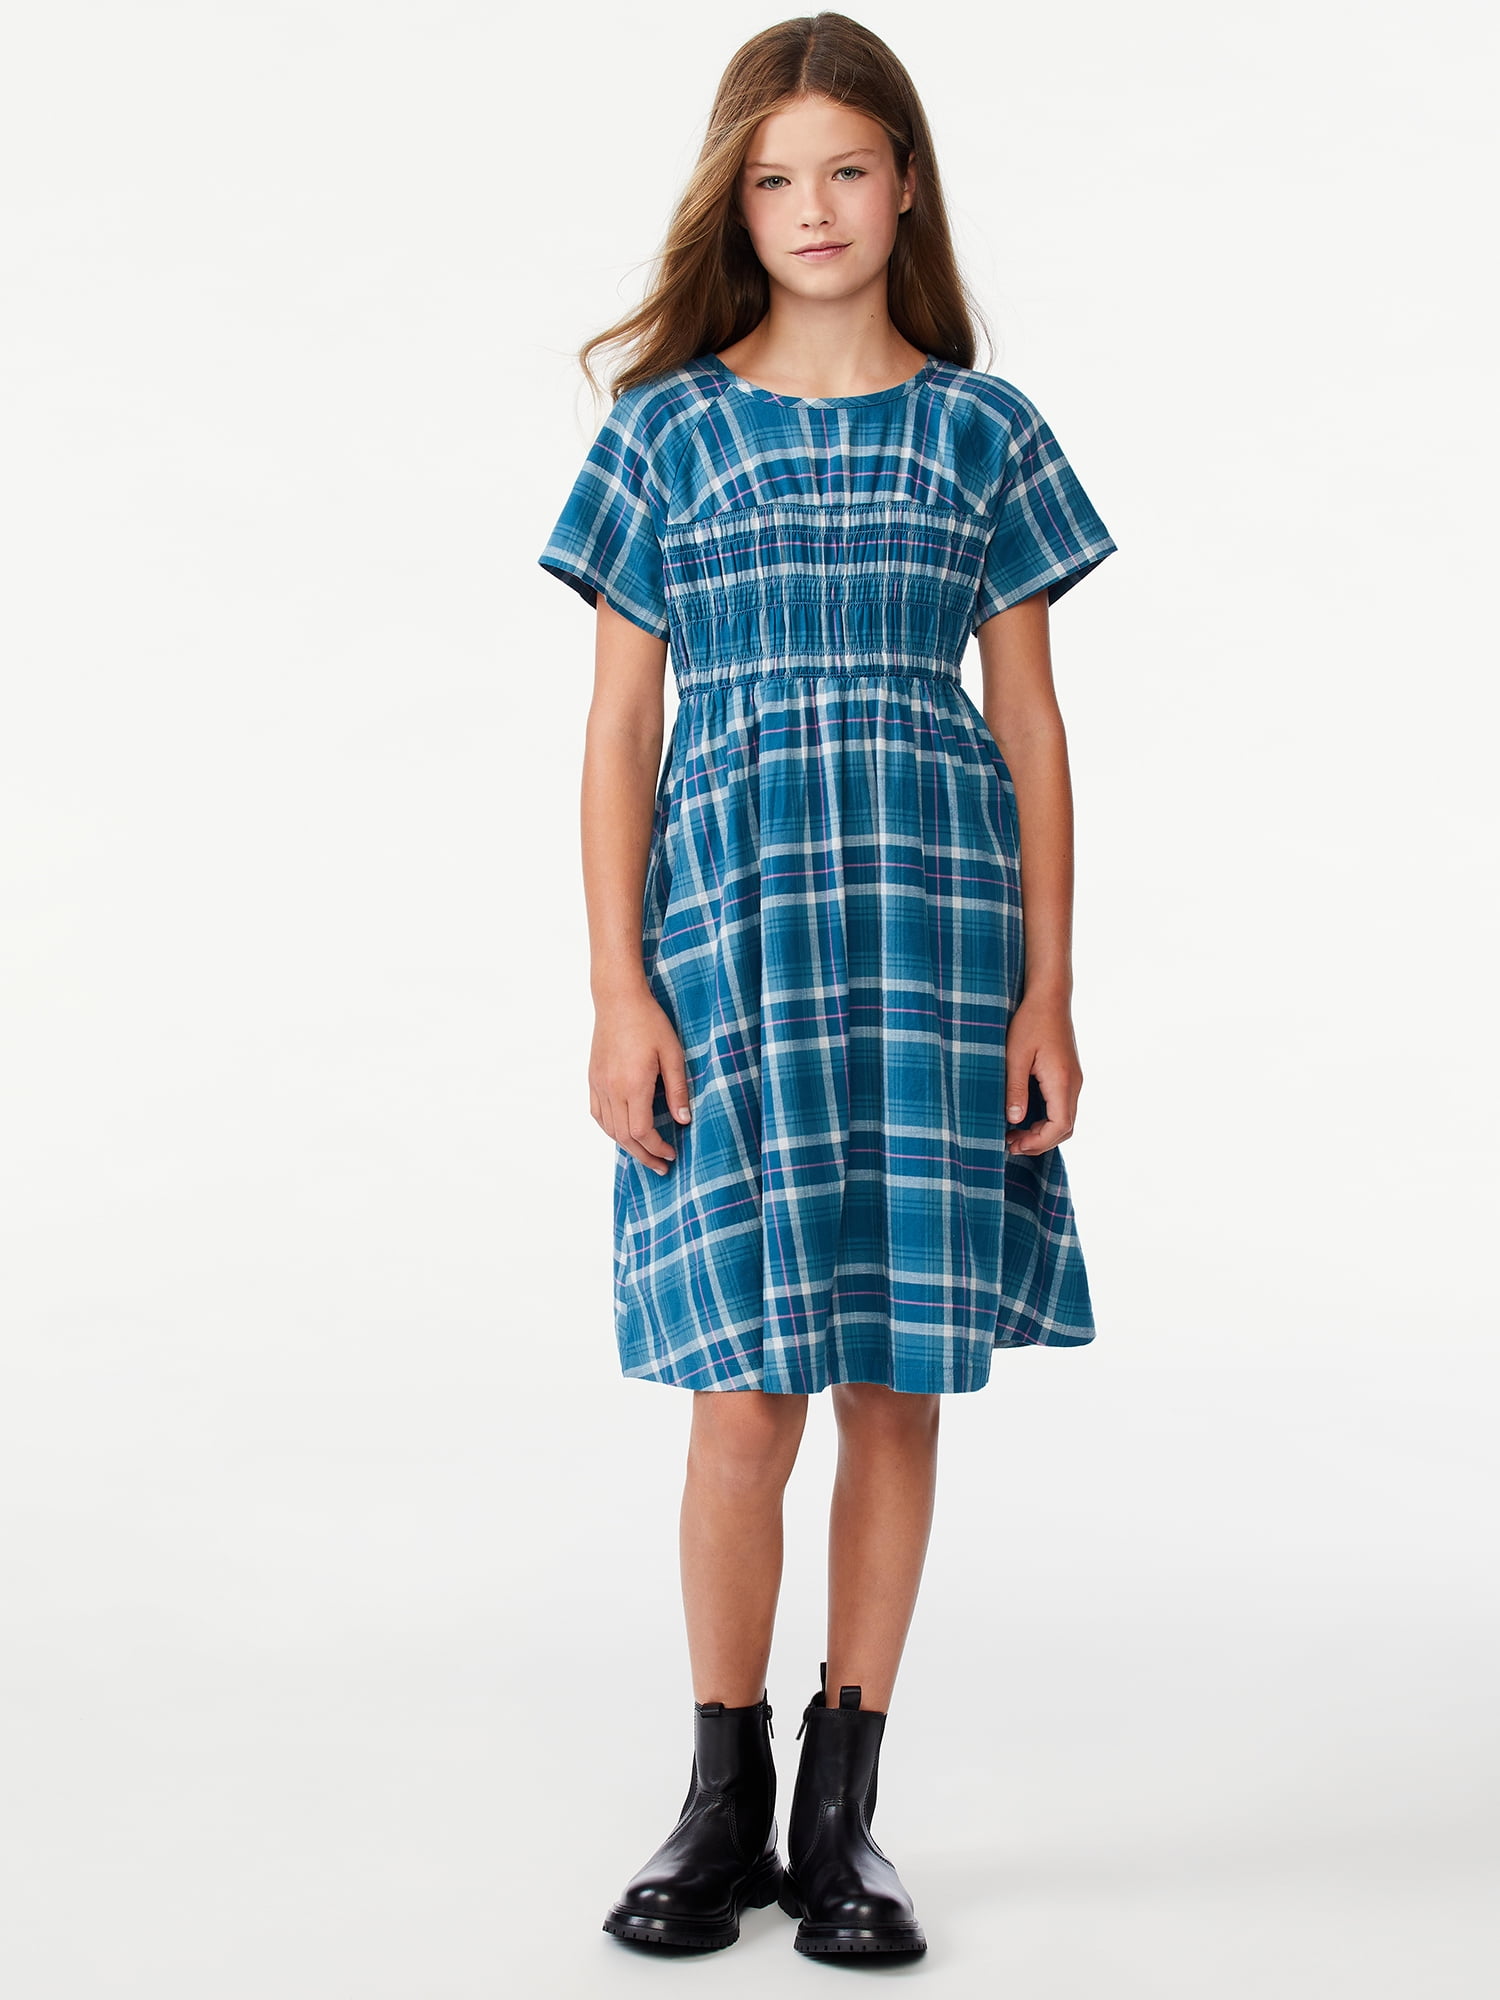 Free Assembly Girls Plaid Dress with Short Sleeves, Sizes 4-18